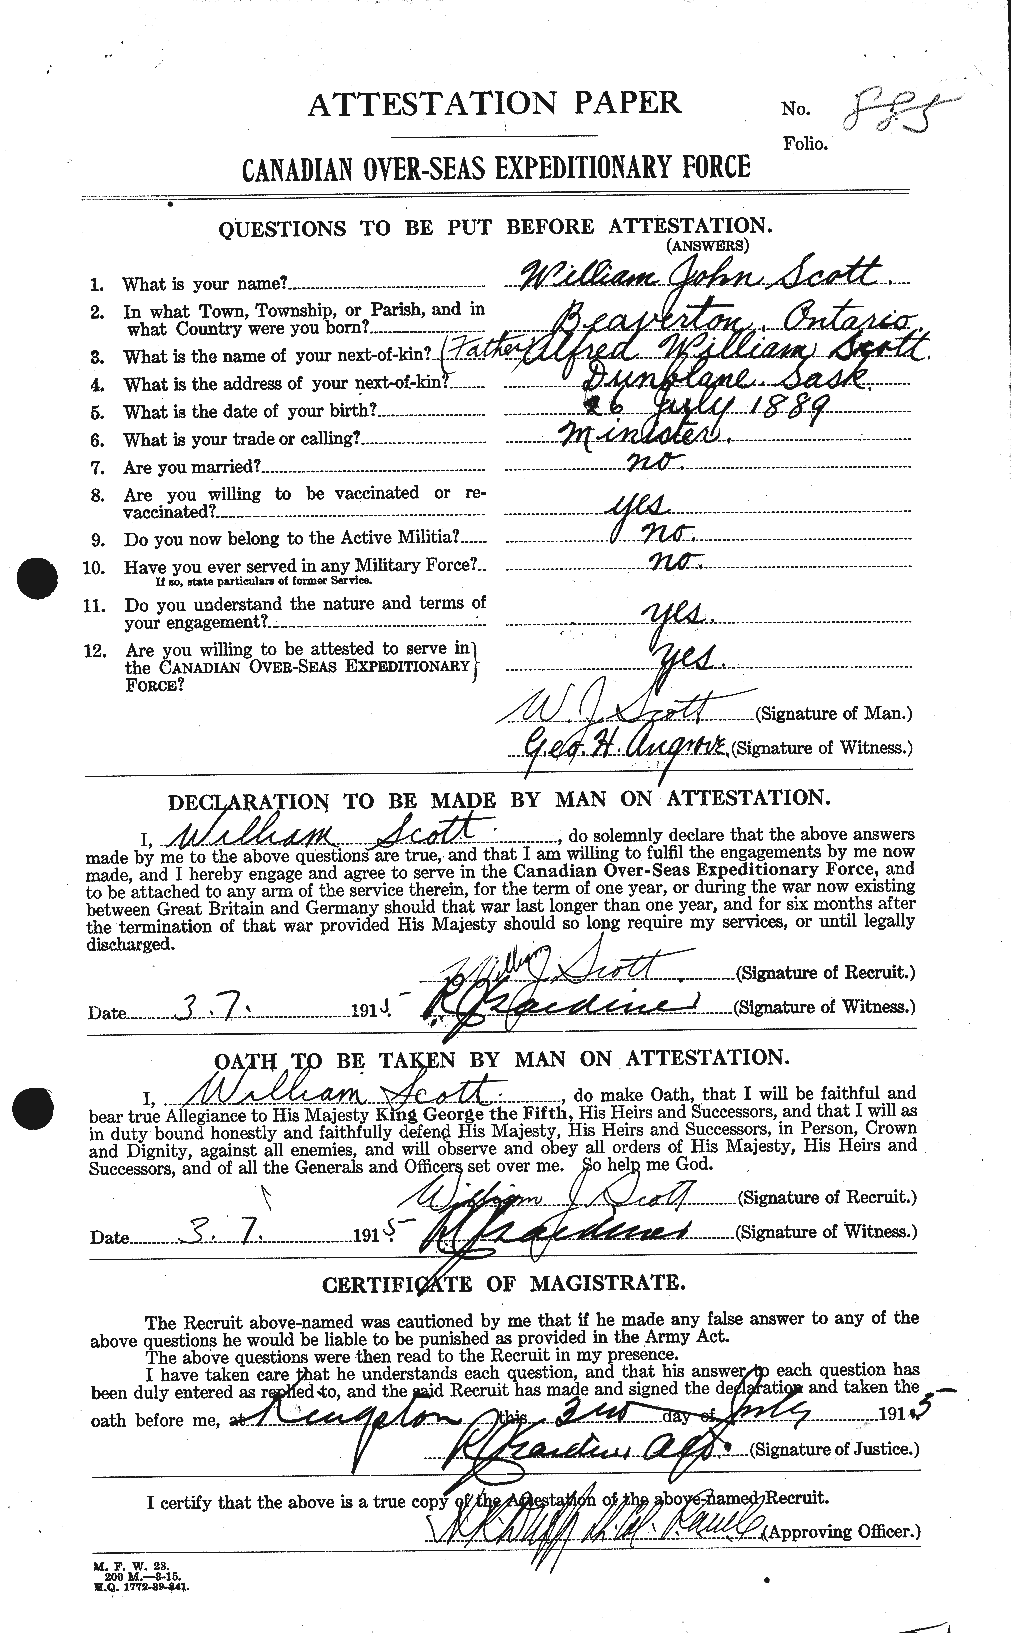 Personnel Records of the First World War - CEF 086756a